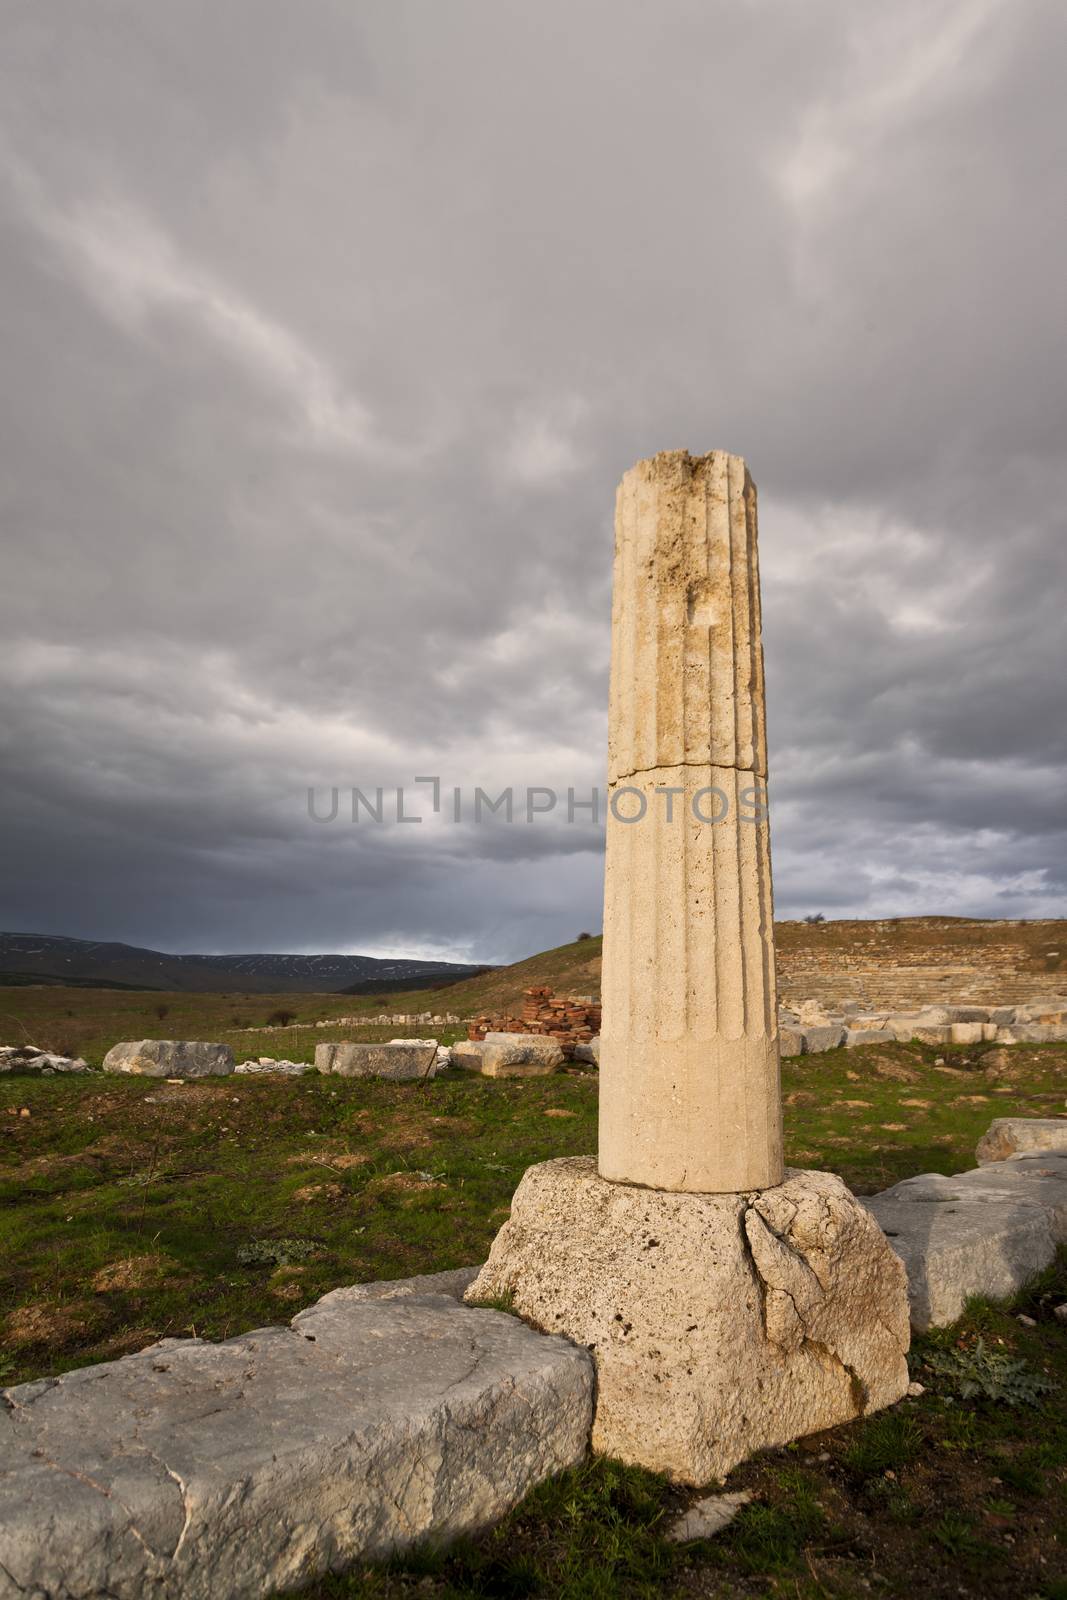 Remains of Ionic column near ampitheater at Antioch Pisidian in Turkey